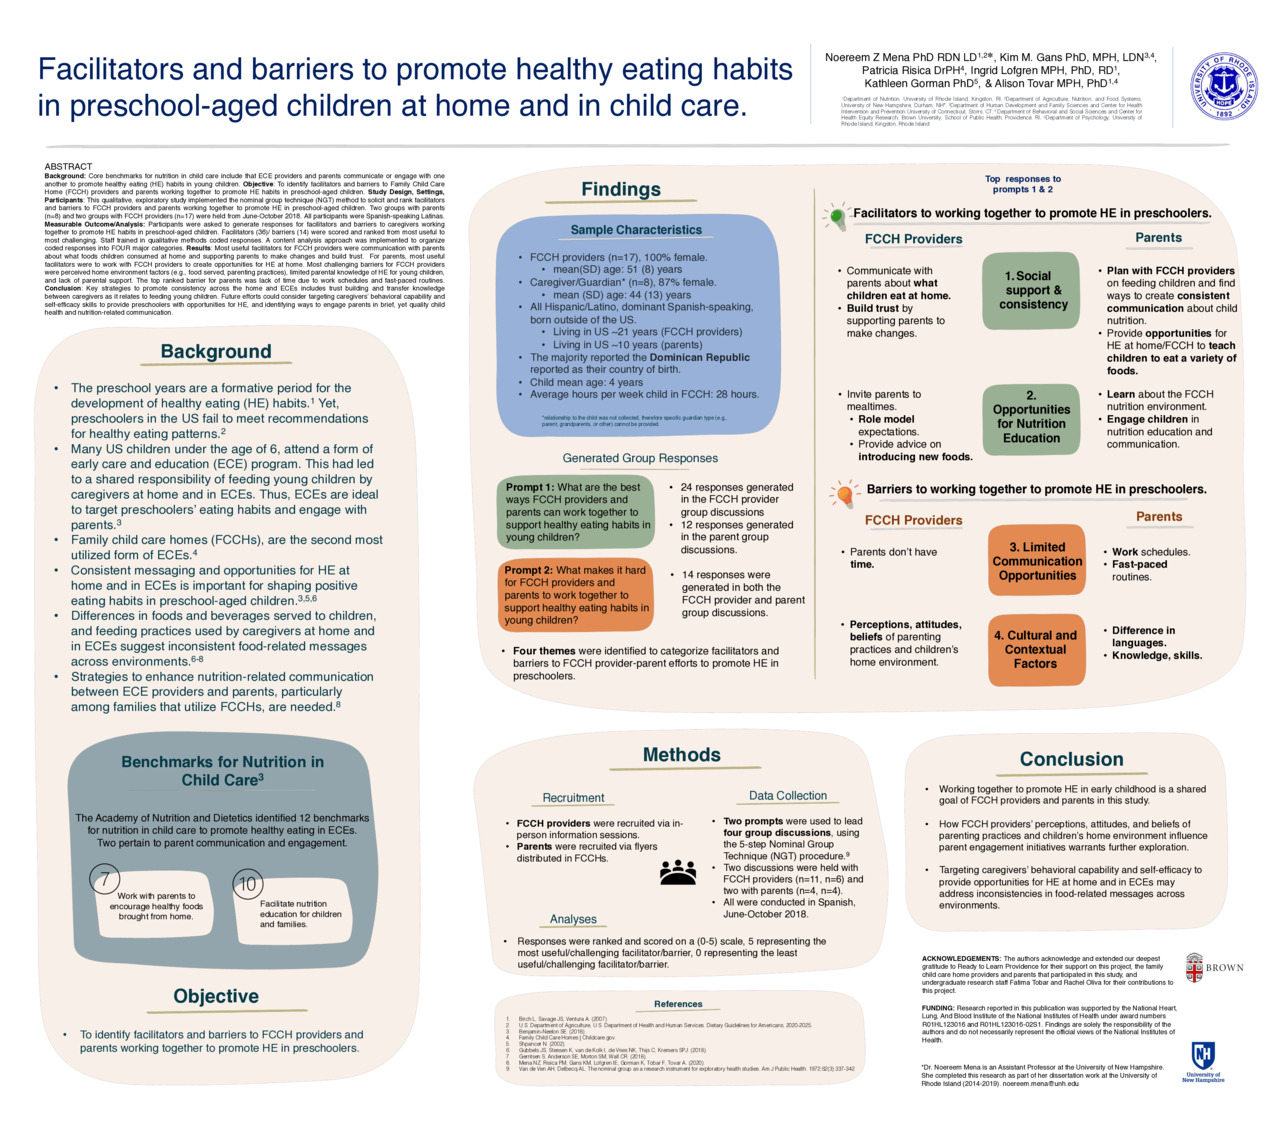 Facilitators And Barriers To Promote Healthy Eating Habits In Preschool-Aged Children At Home And In Child Care. by nzm1002